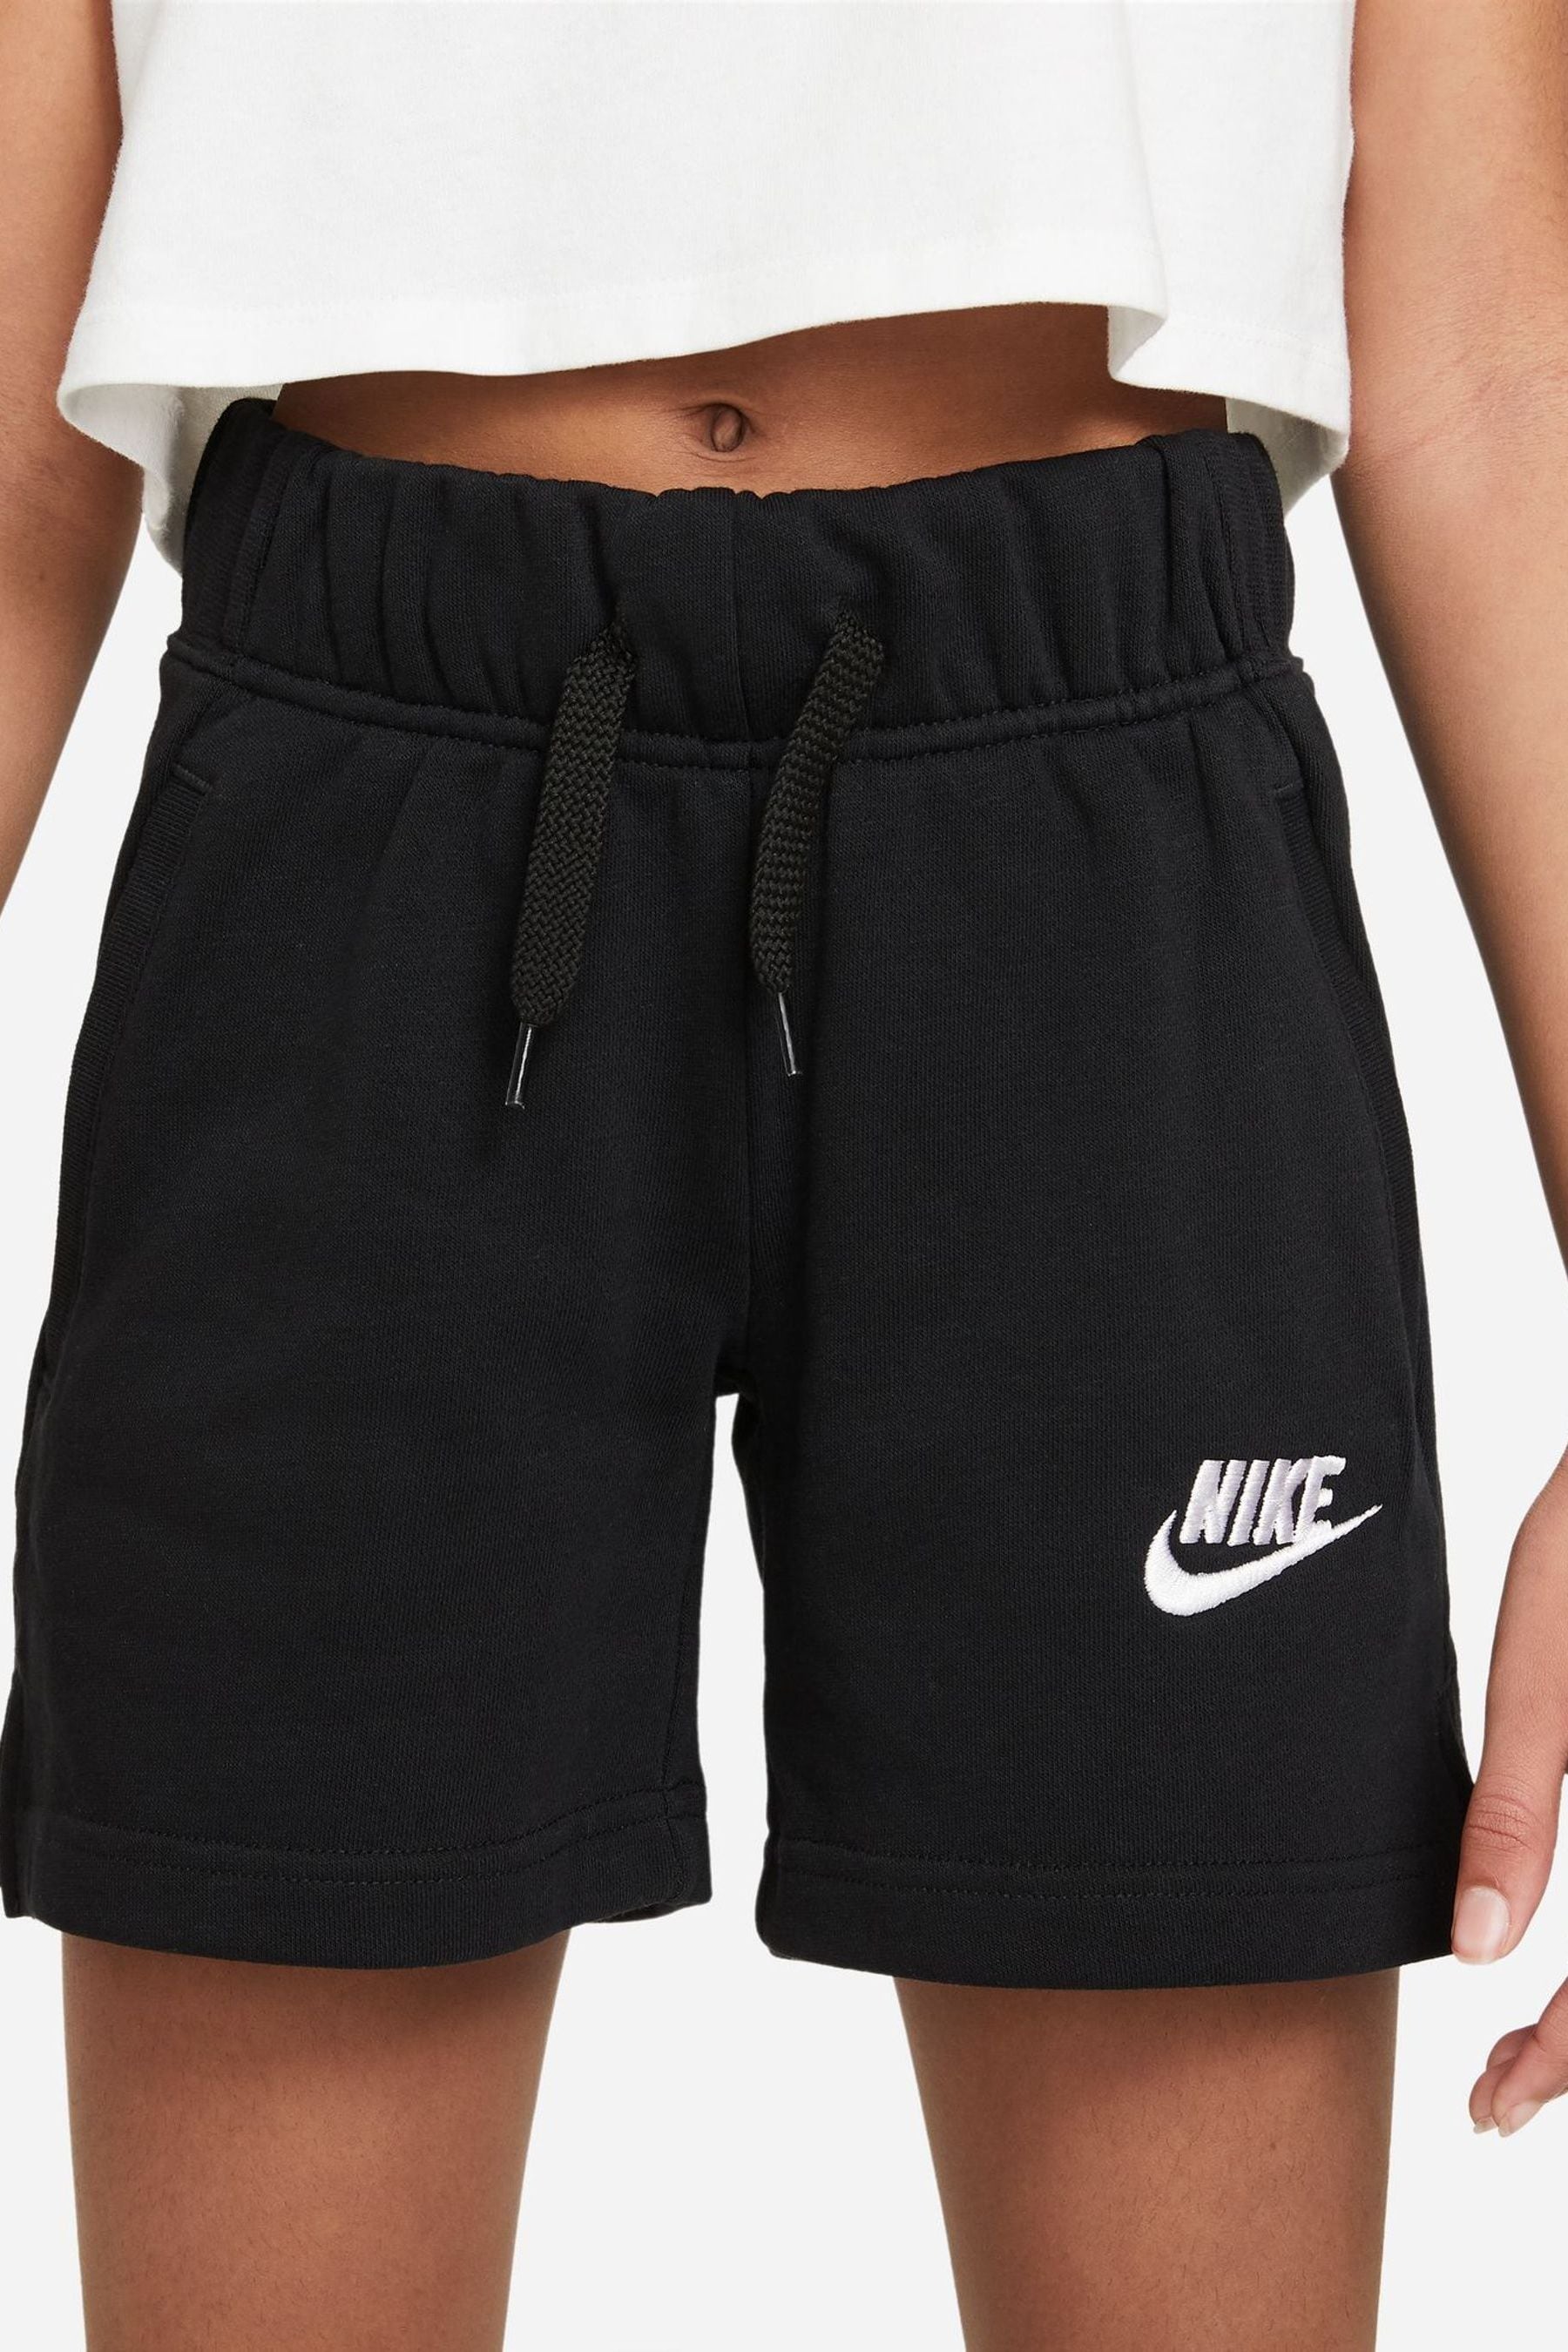 Buy Nike Black Club French Terry 5 Inch Shorts from the Next UK online shop